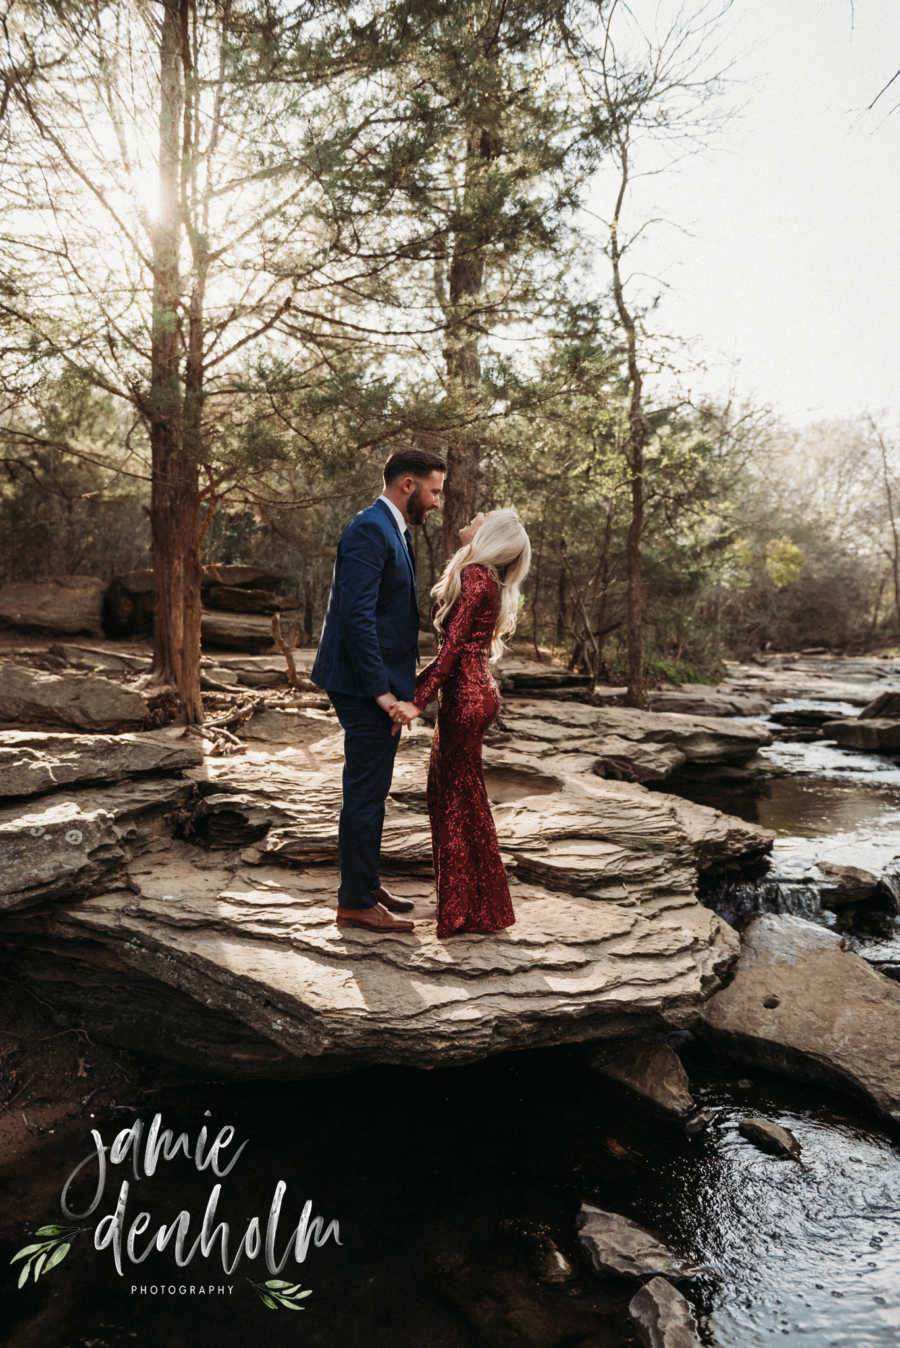 Husband and wife stand holding hands in formal attire on rock beside river